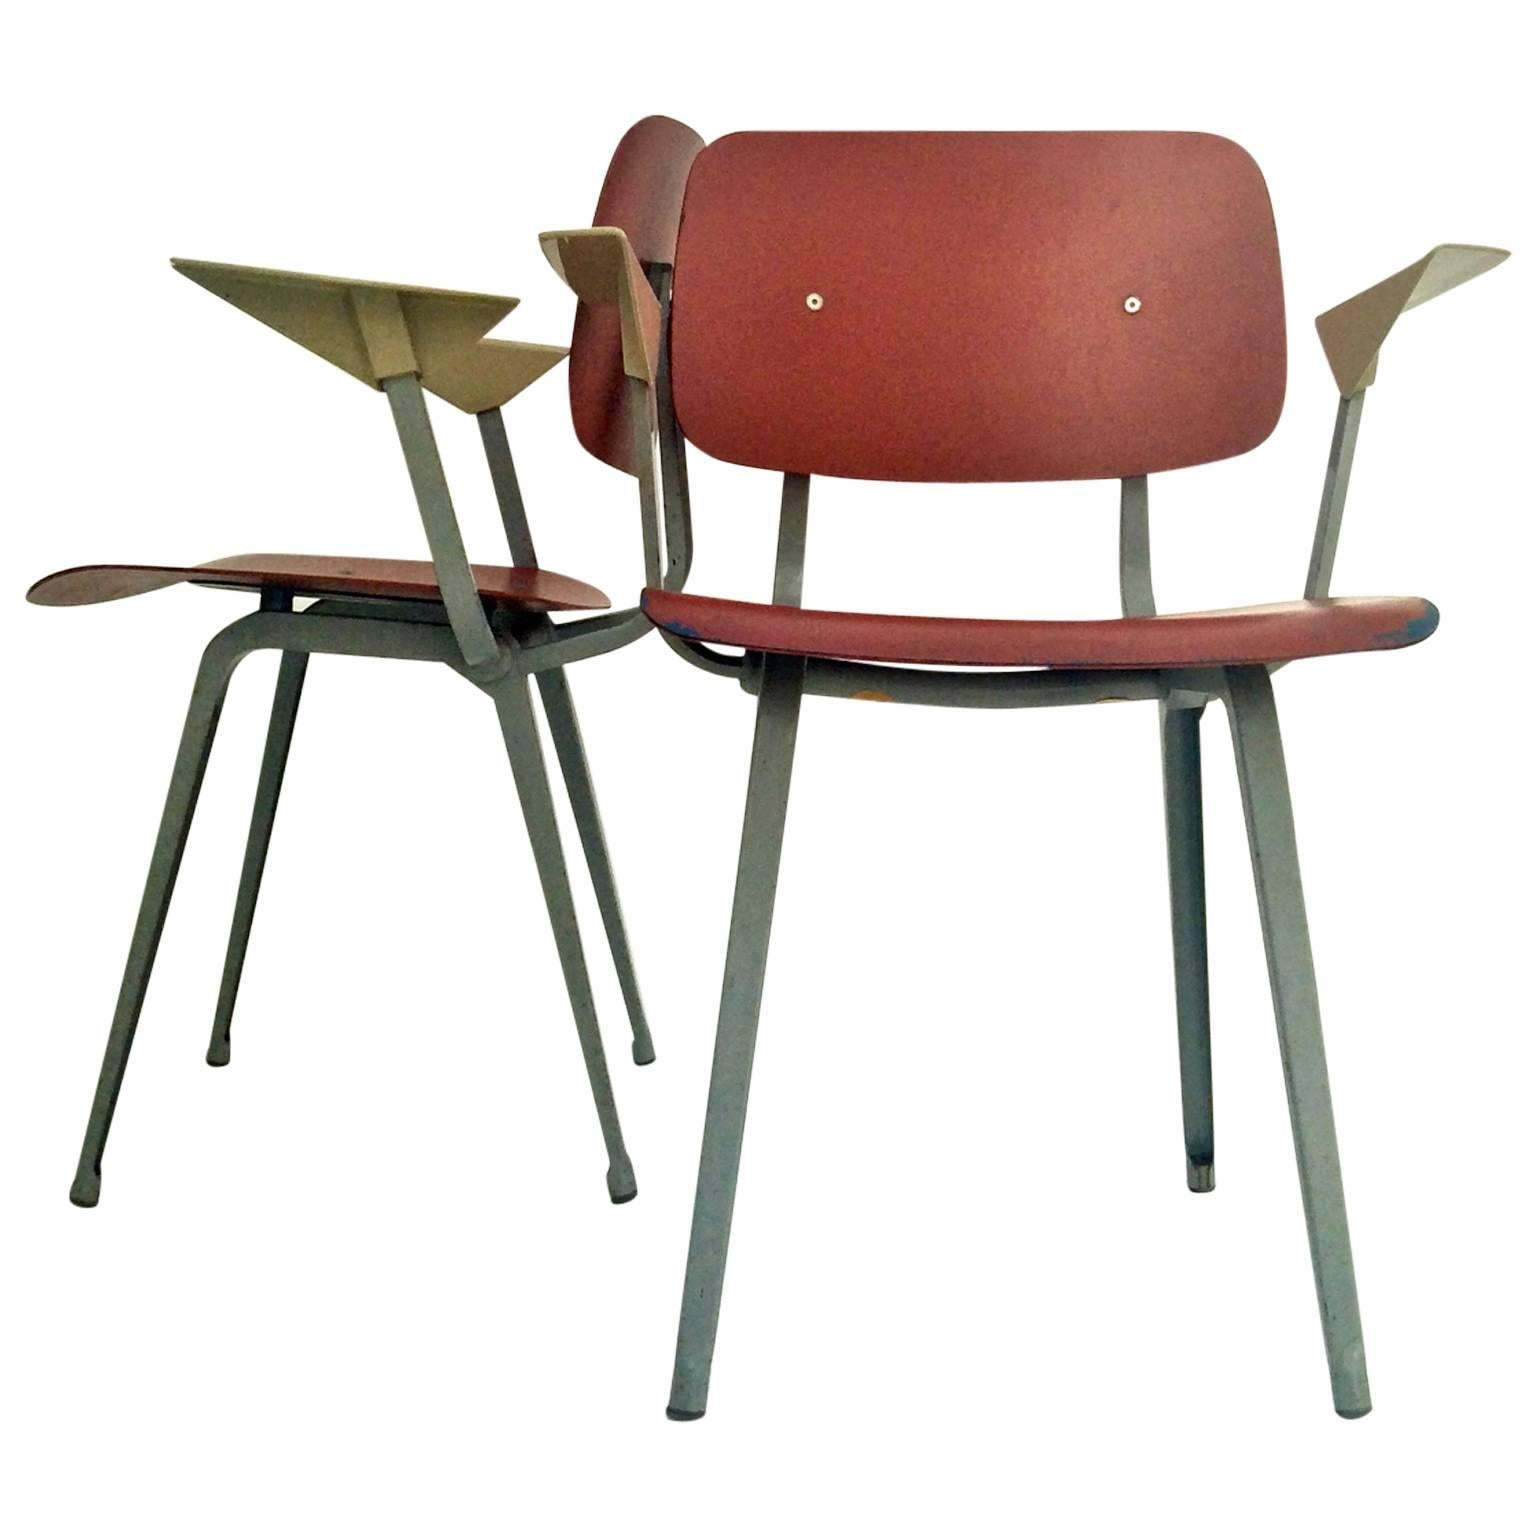 Pair of Revolt Chairs by Friso Kramer, Netherlands